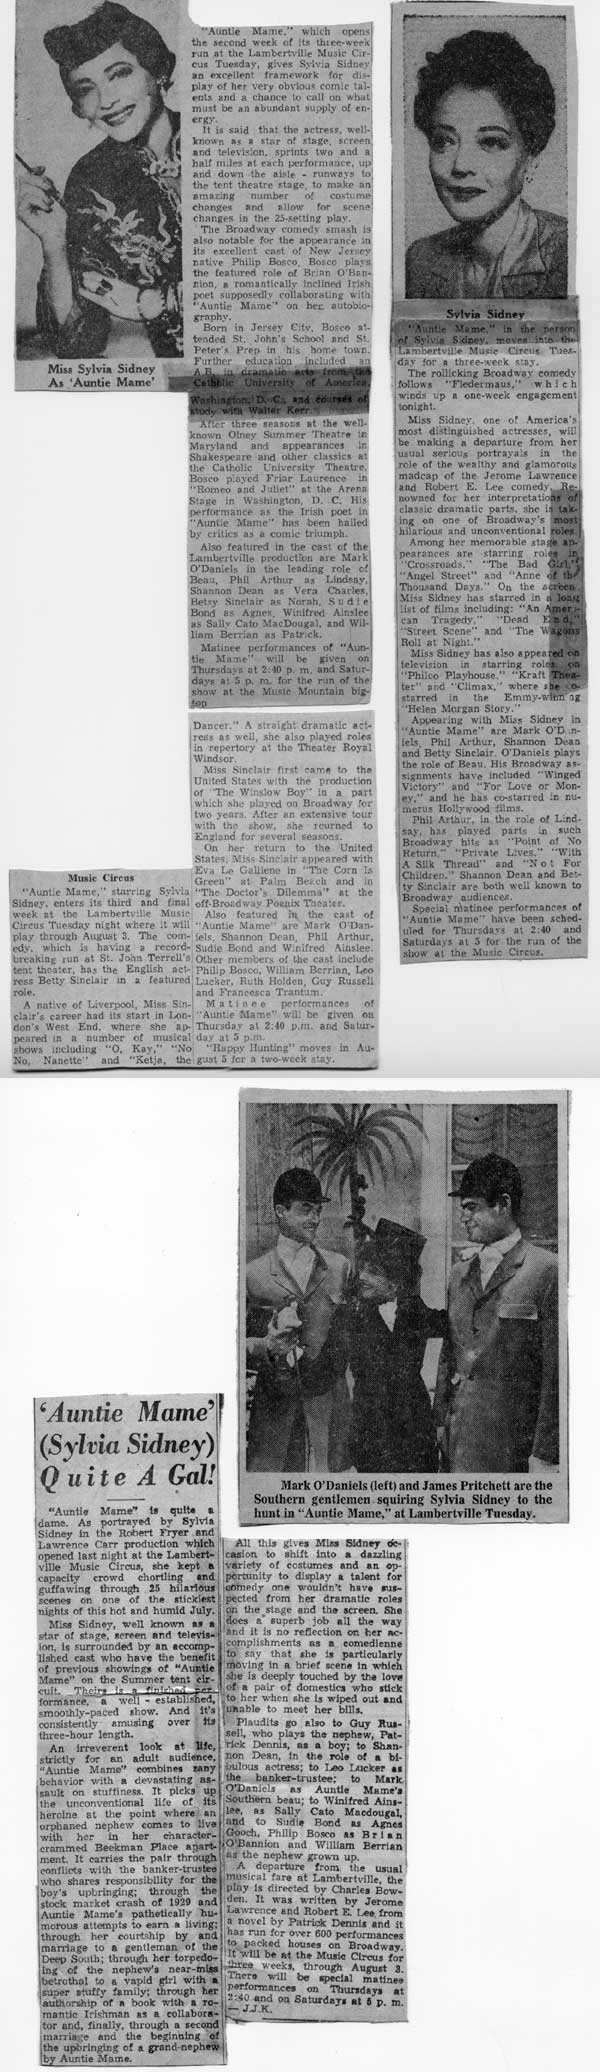 Press Clippings for 1958 Production of 'Auntie Mame'